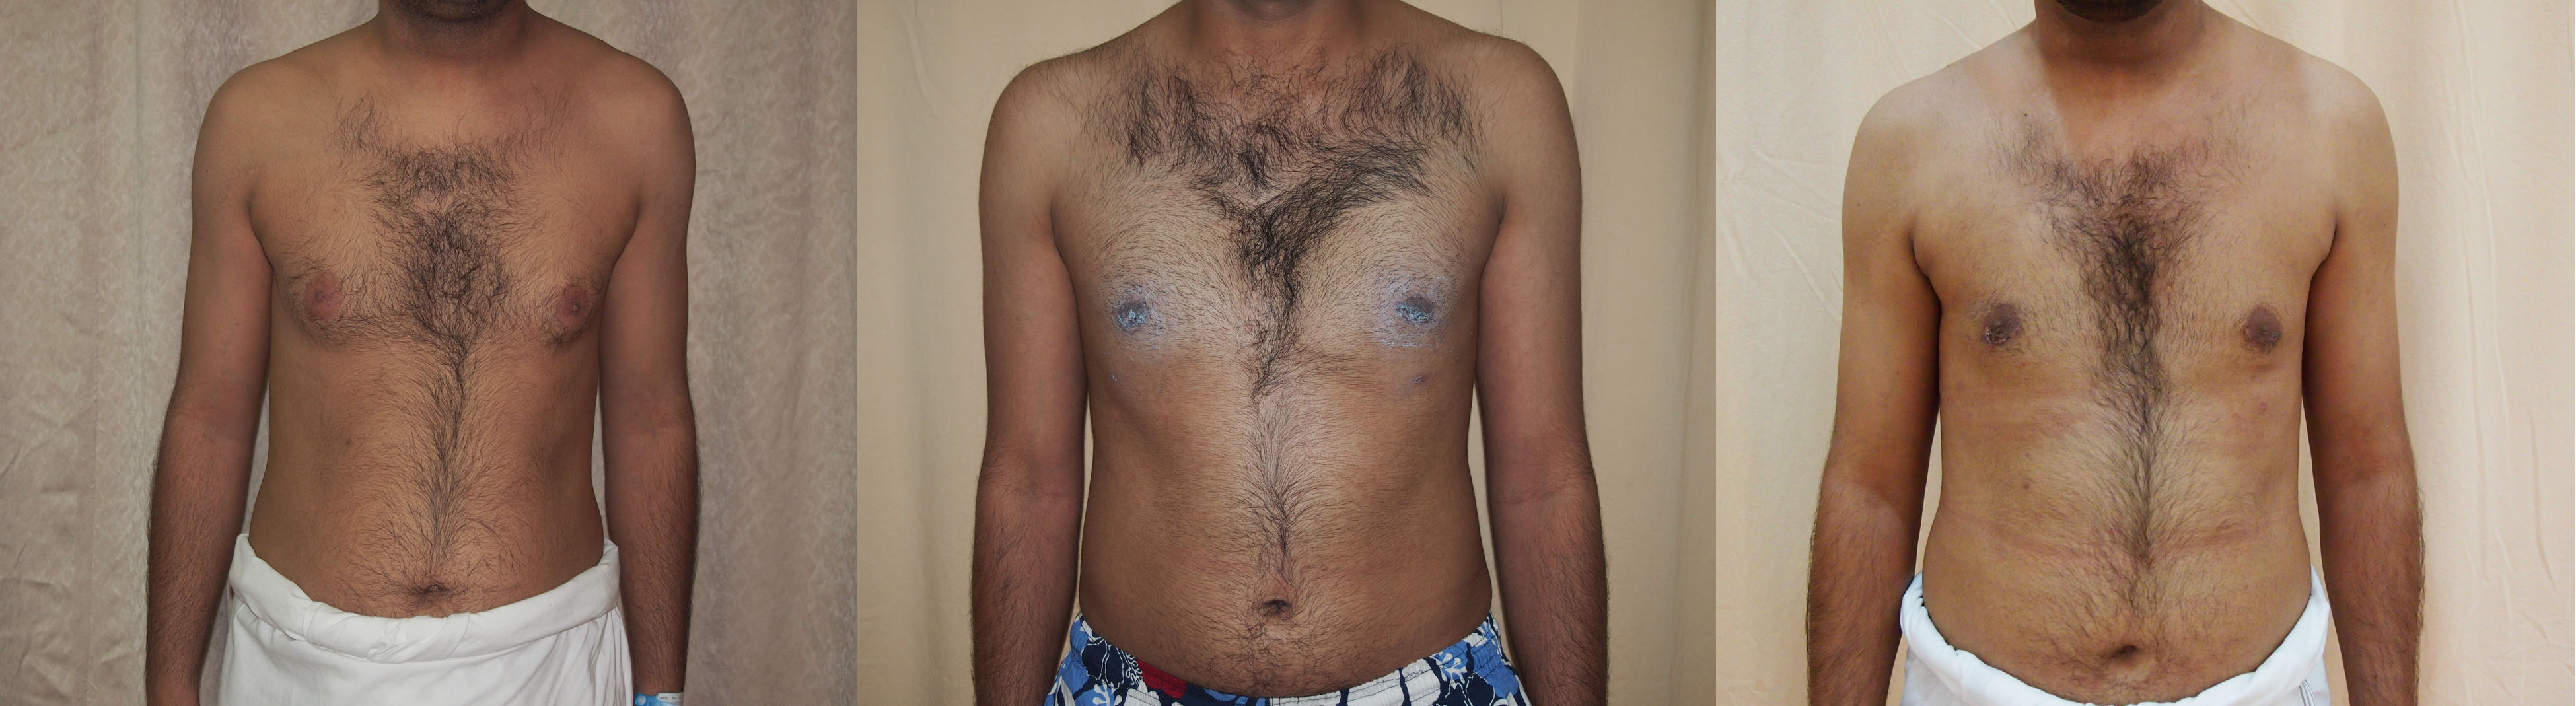 Male chest reduction surgery in London and Manchester